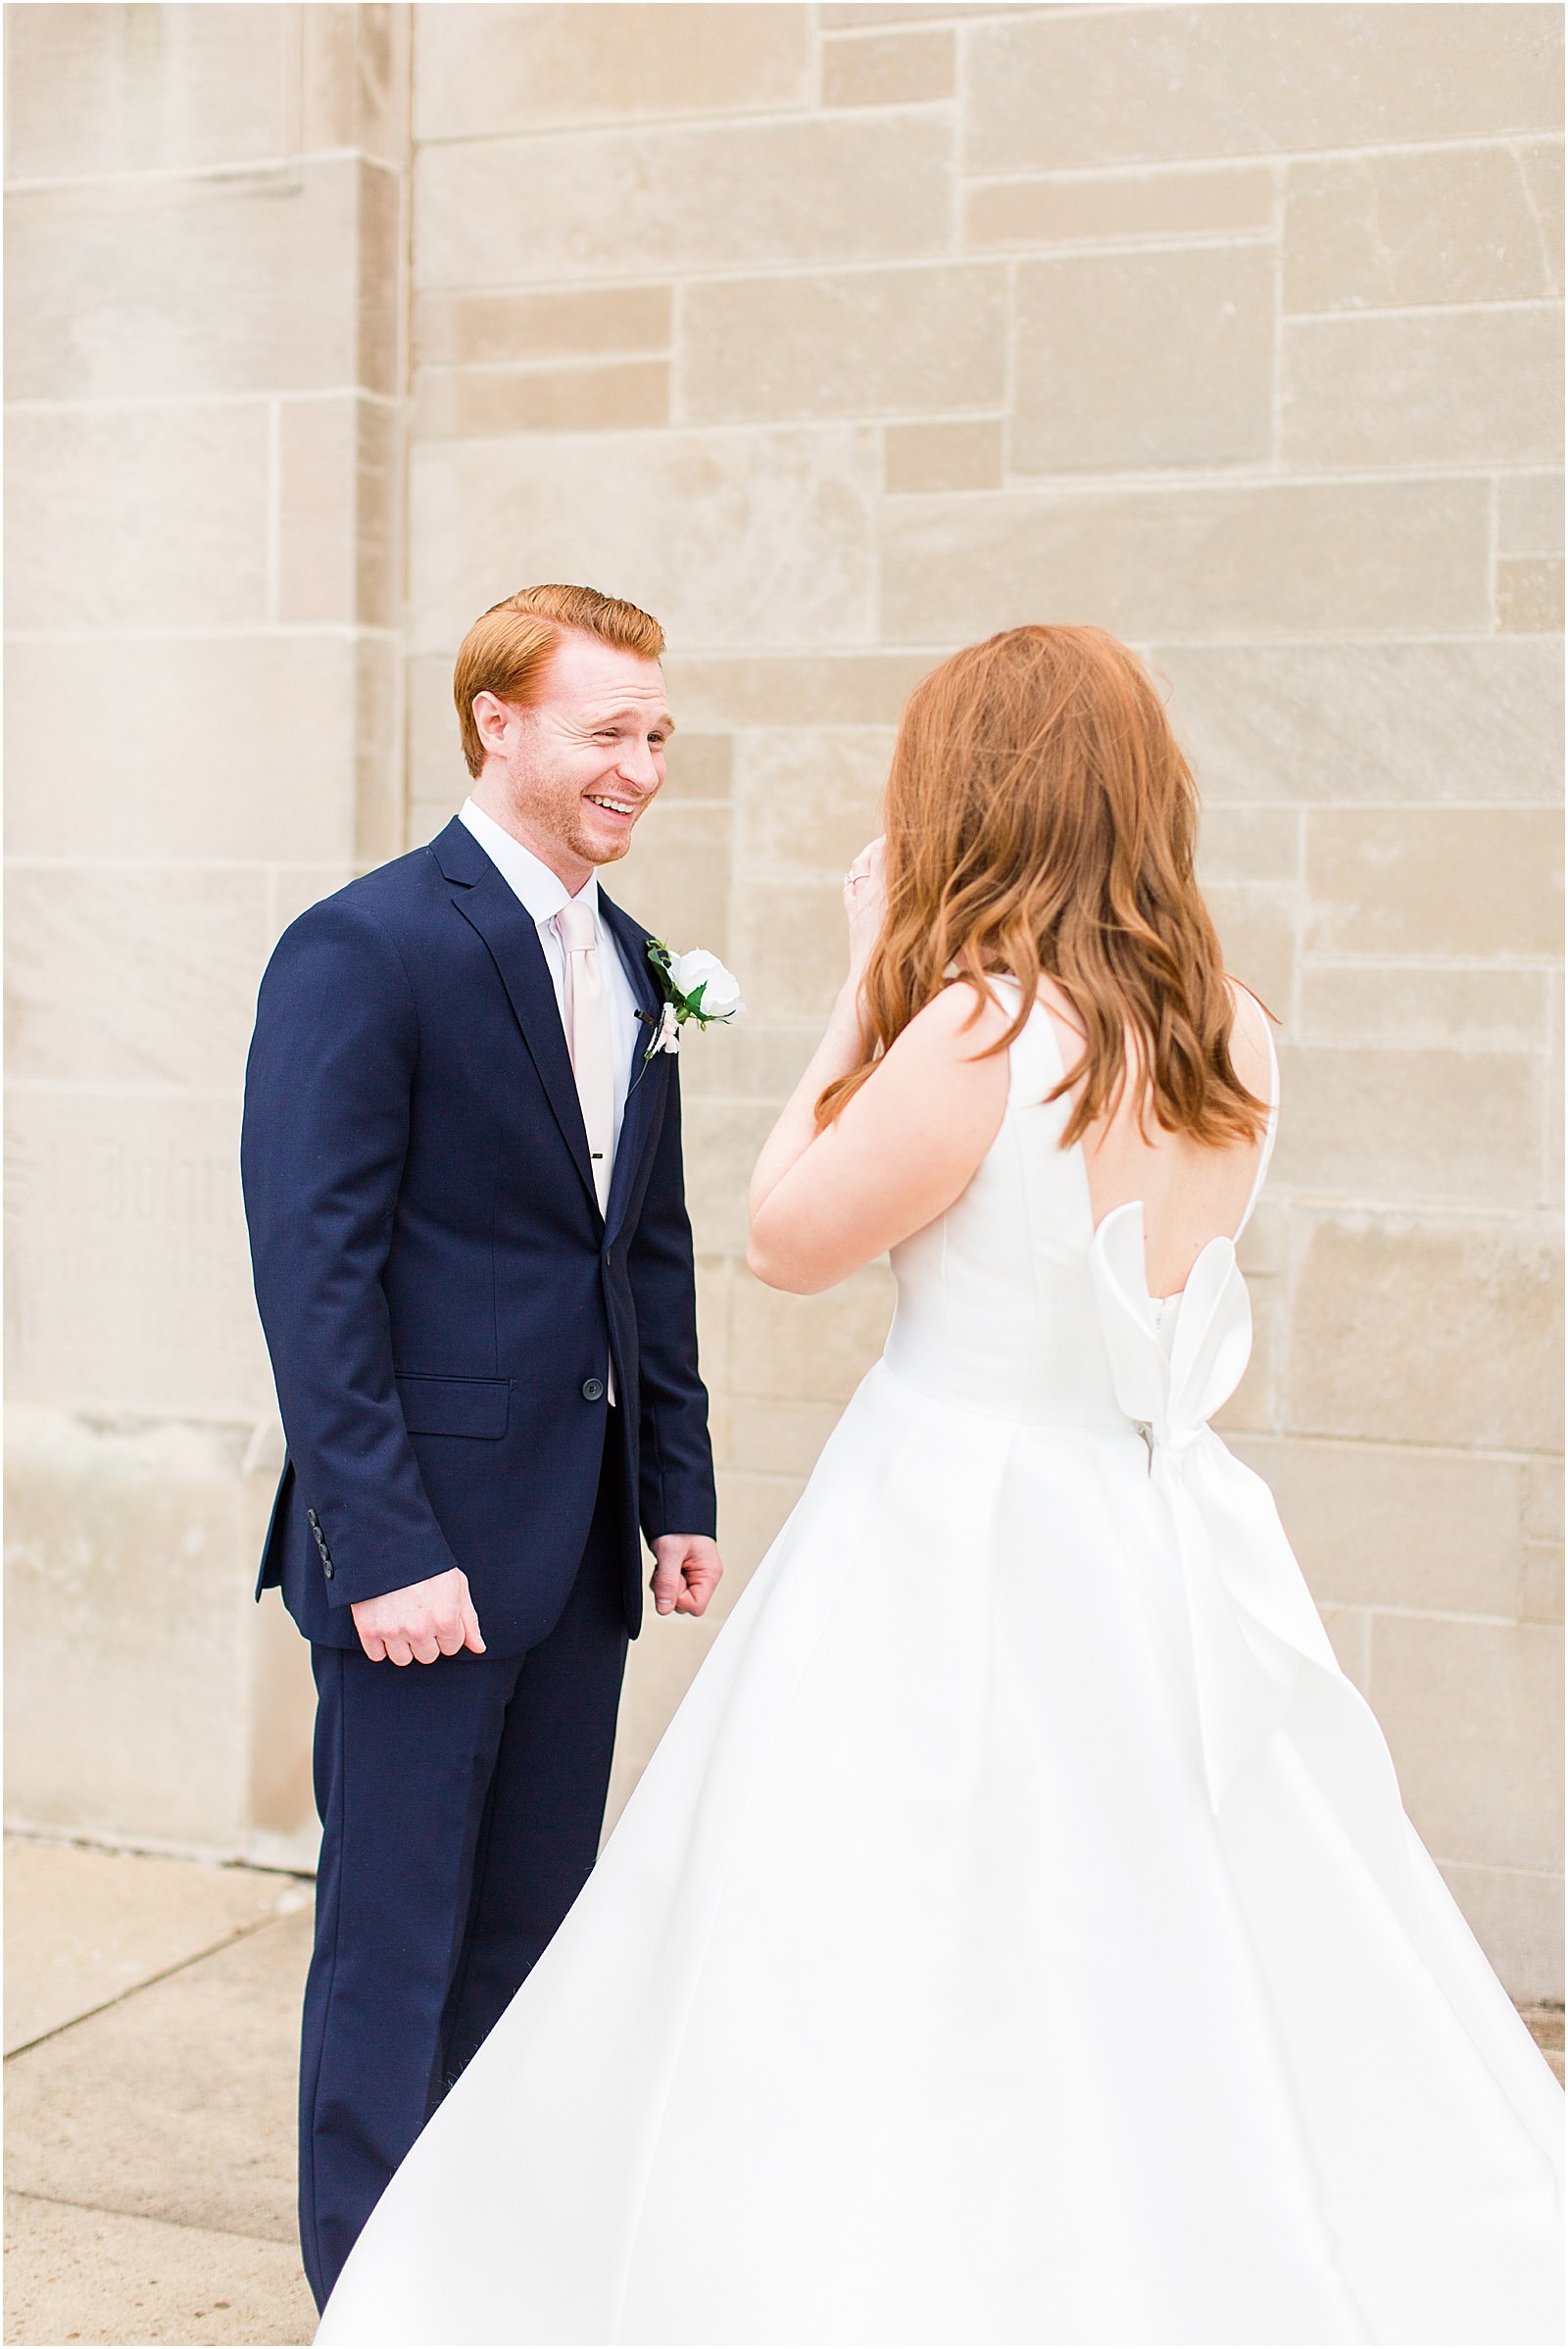 A Perfectly Intimate Wedding in Downtown Evansville Indiana | Jennah and Steve | Bret and Brandie Photography | | 0048.jpg